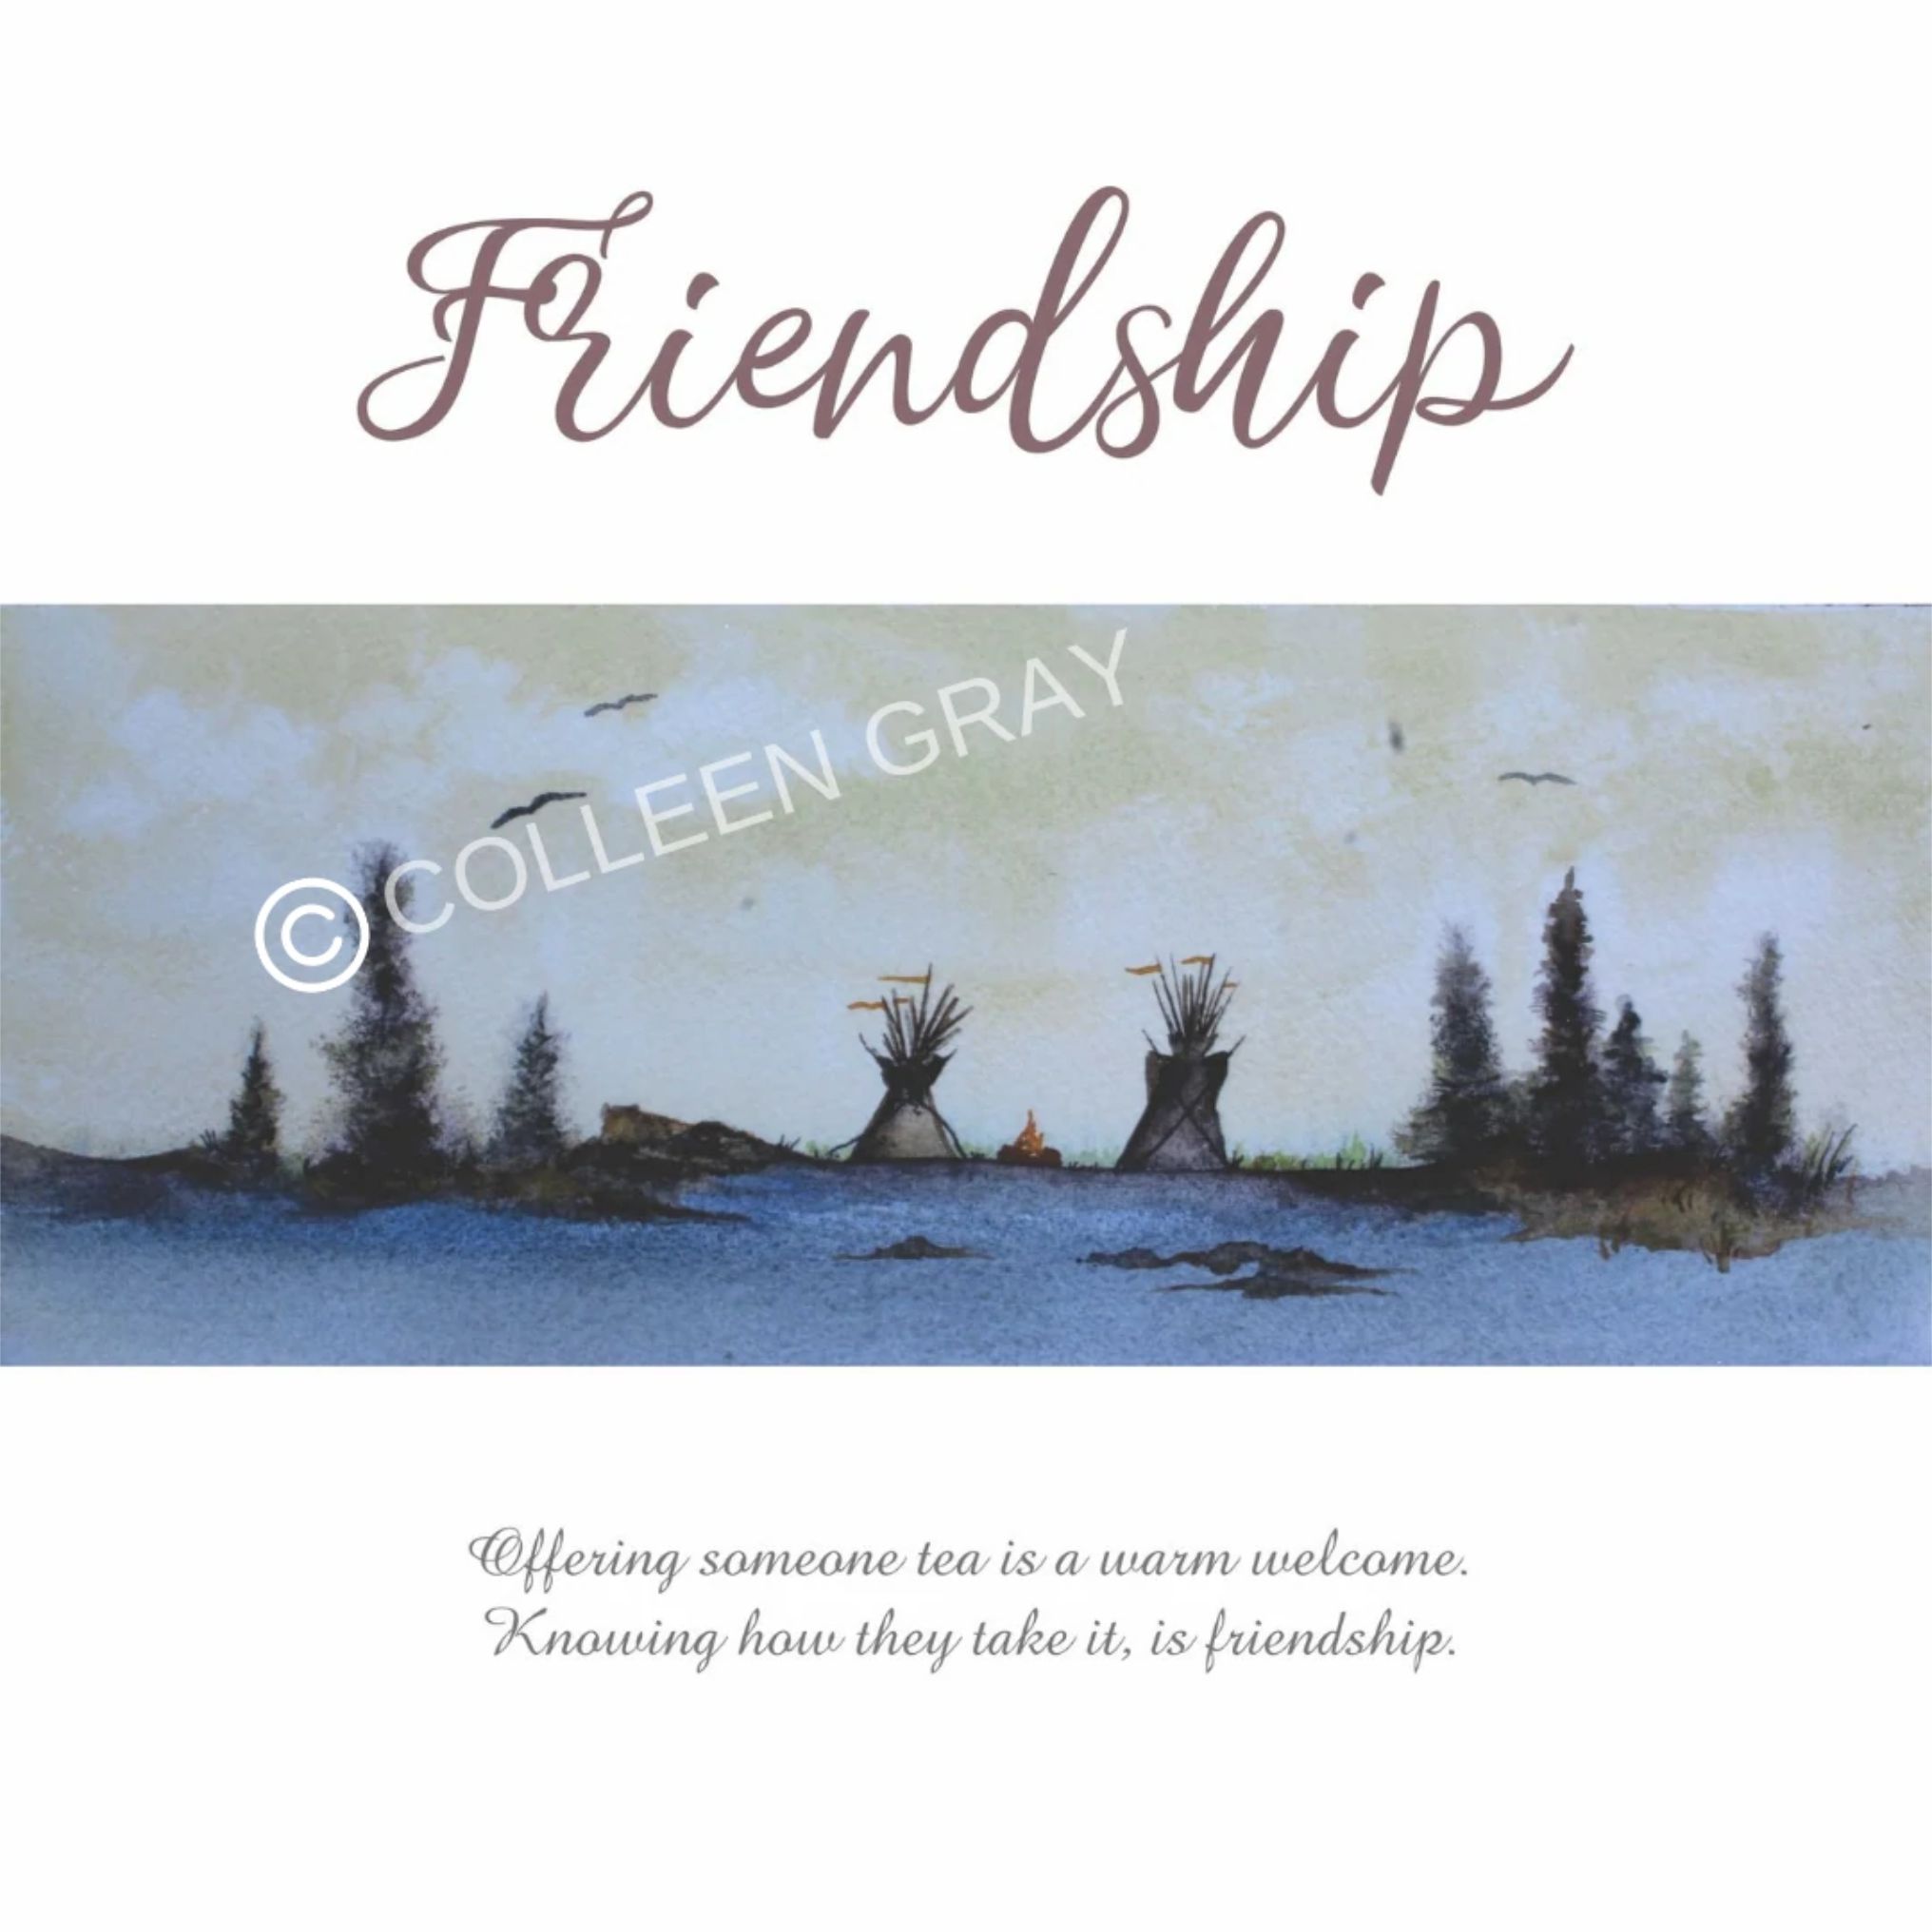 Above the image in script text is the word "Friendship". The painting is of 2 tipis with a small home fire between them and spruce trees on either side. There is snow on the ground. Beneath the image are the words, "Offering someone tea is a warm welcome. Knowing how they take it, is friendship. "